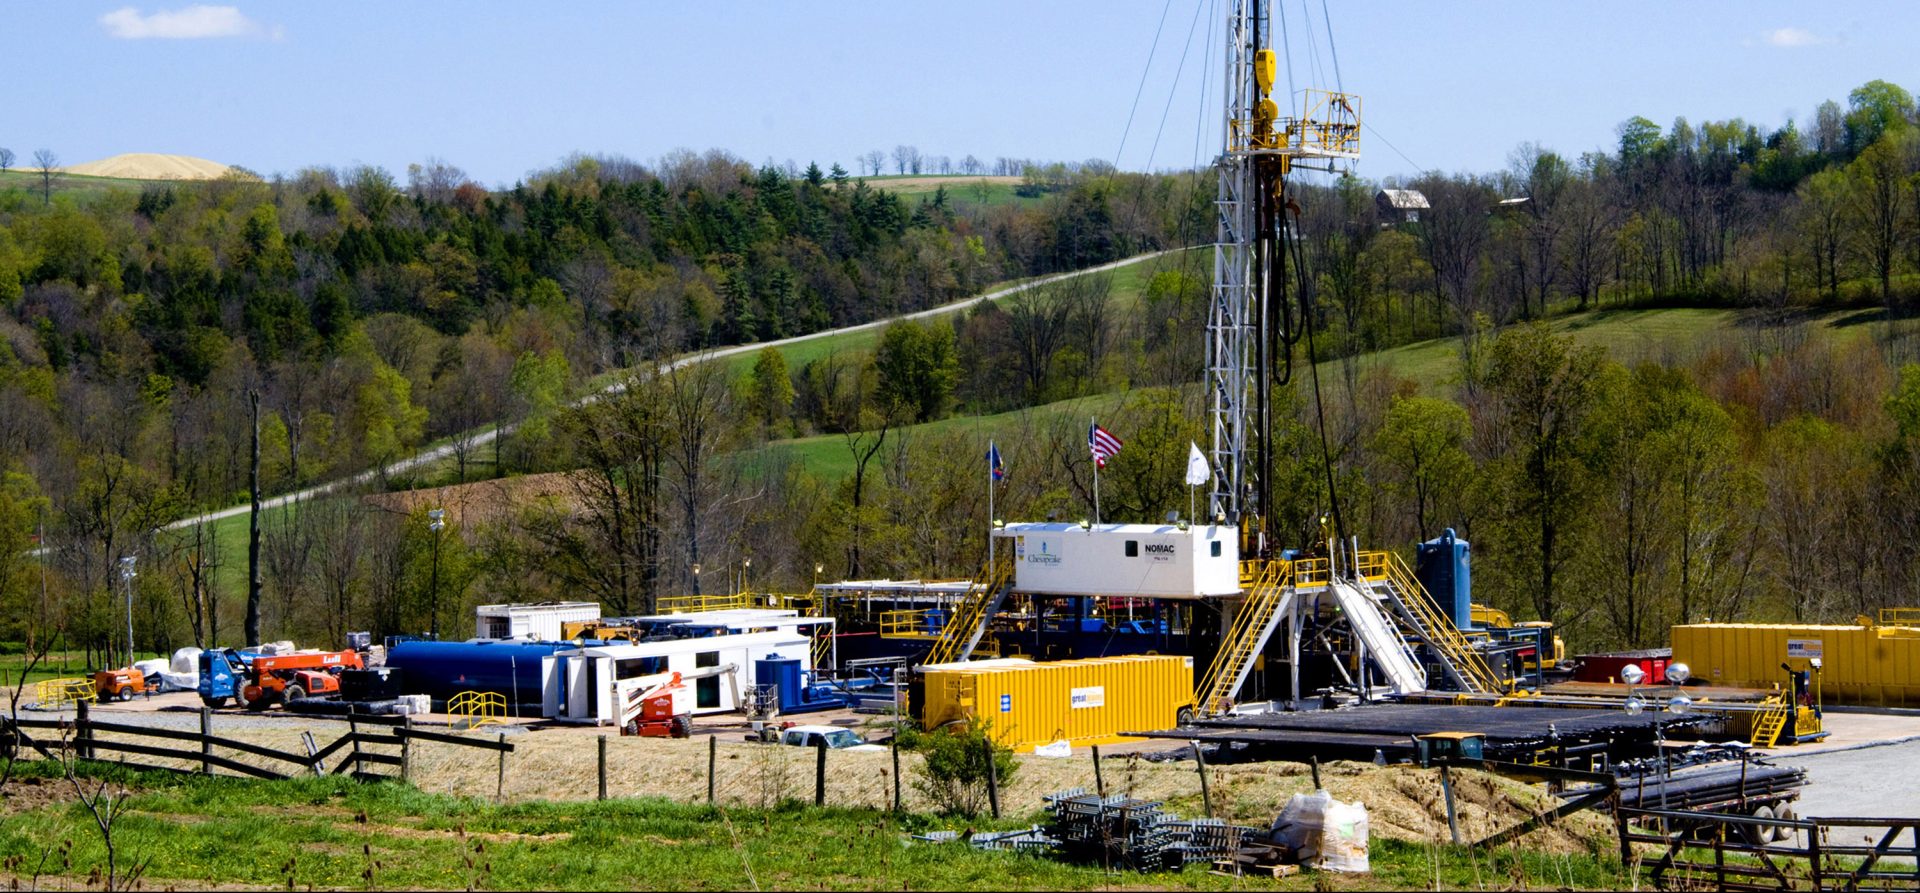 This 2017 file photo shows a Chesapeake Energy natural gas well site in Bradford County, Pa.